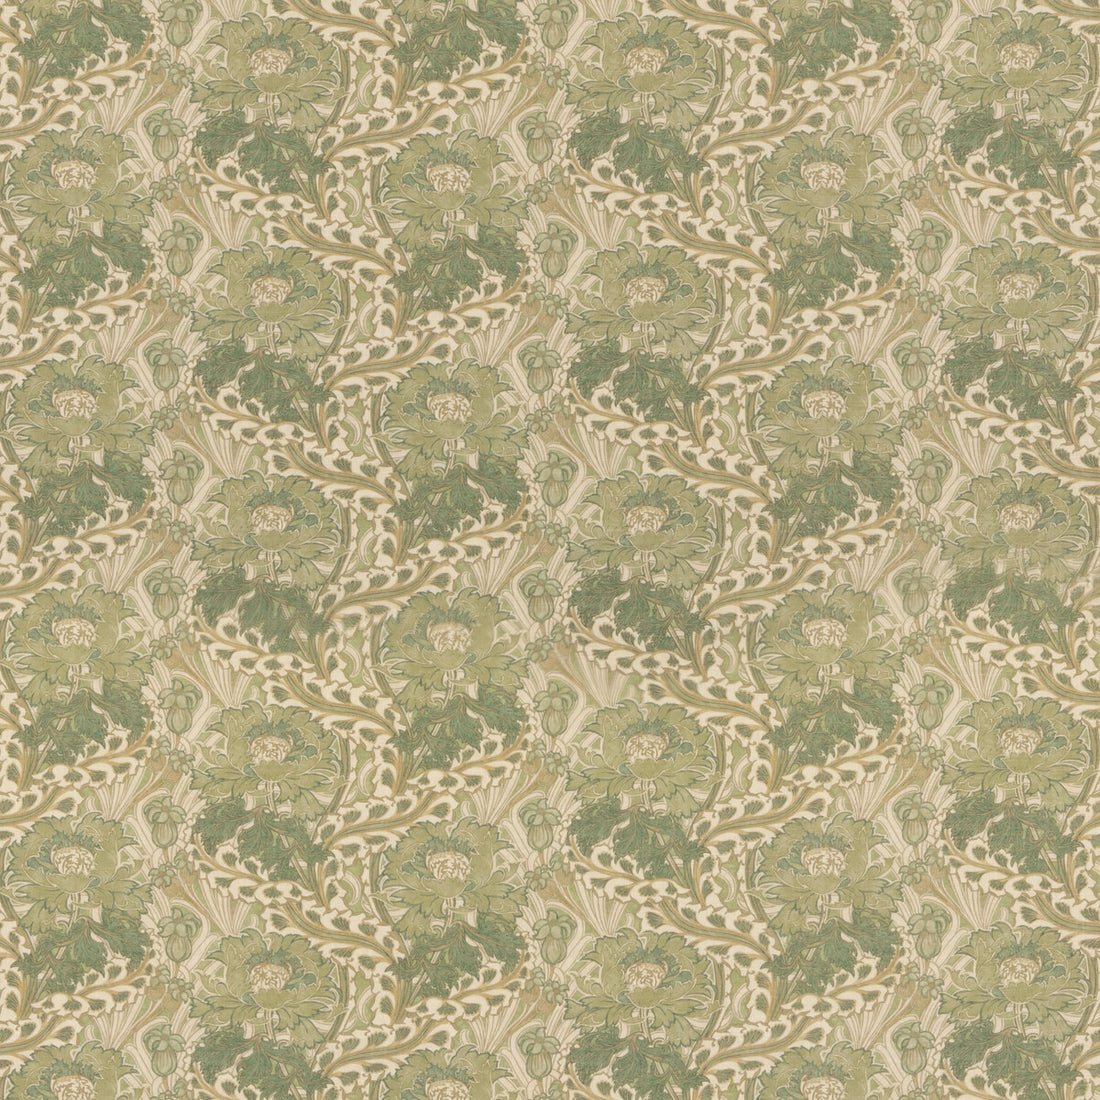 Little Brantwood fabric in green color - pattern BP10983.2.0 - by G P &amp; J Baker in the Original Brantwood Fabric collection